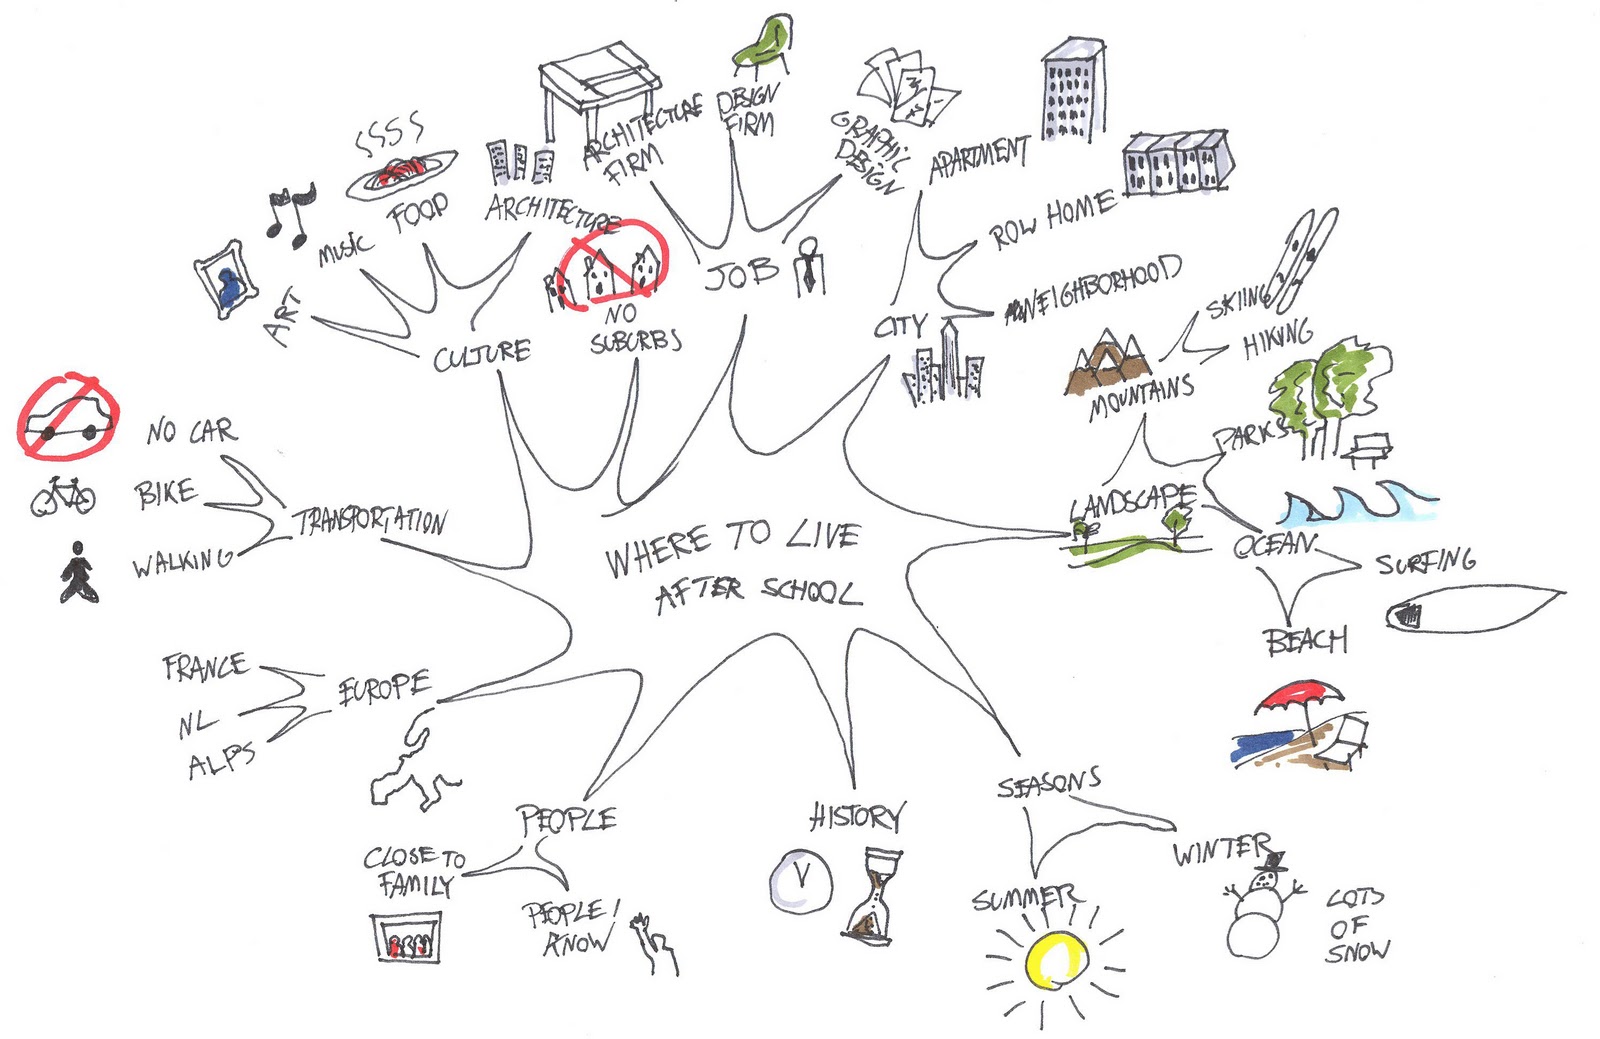 WHERE TO LIVE AFTER SCHOOL Mind+Map+1